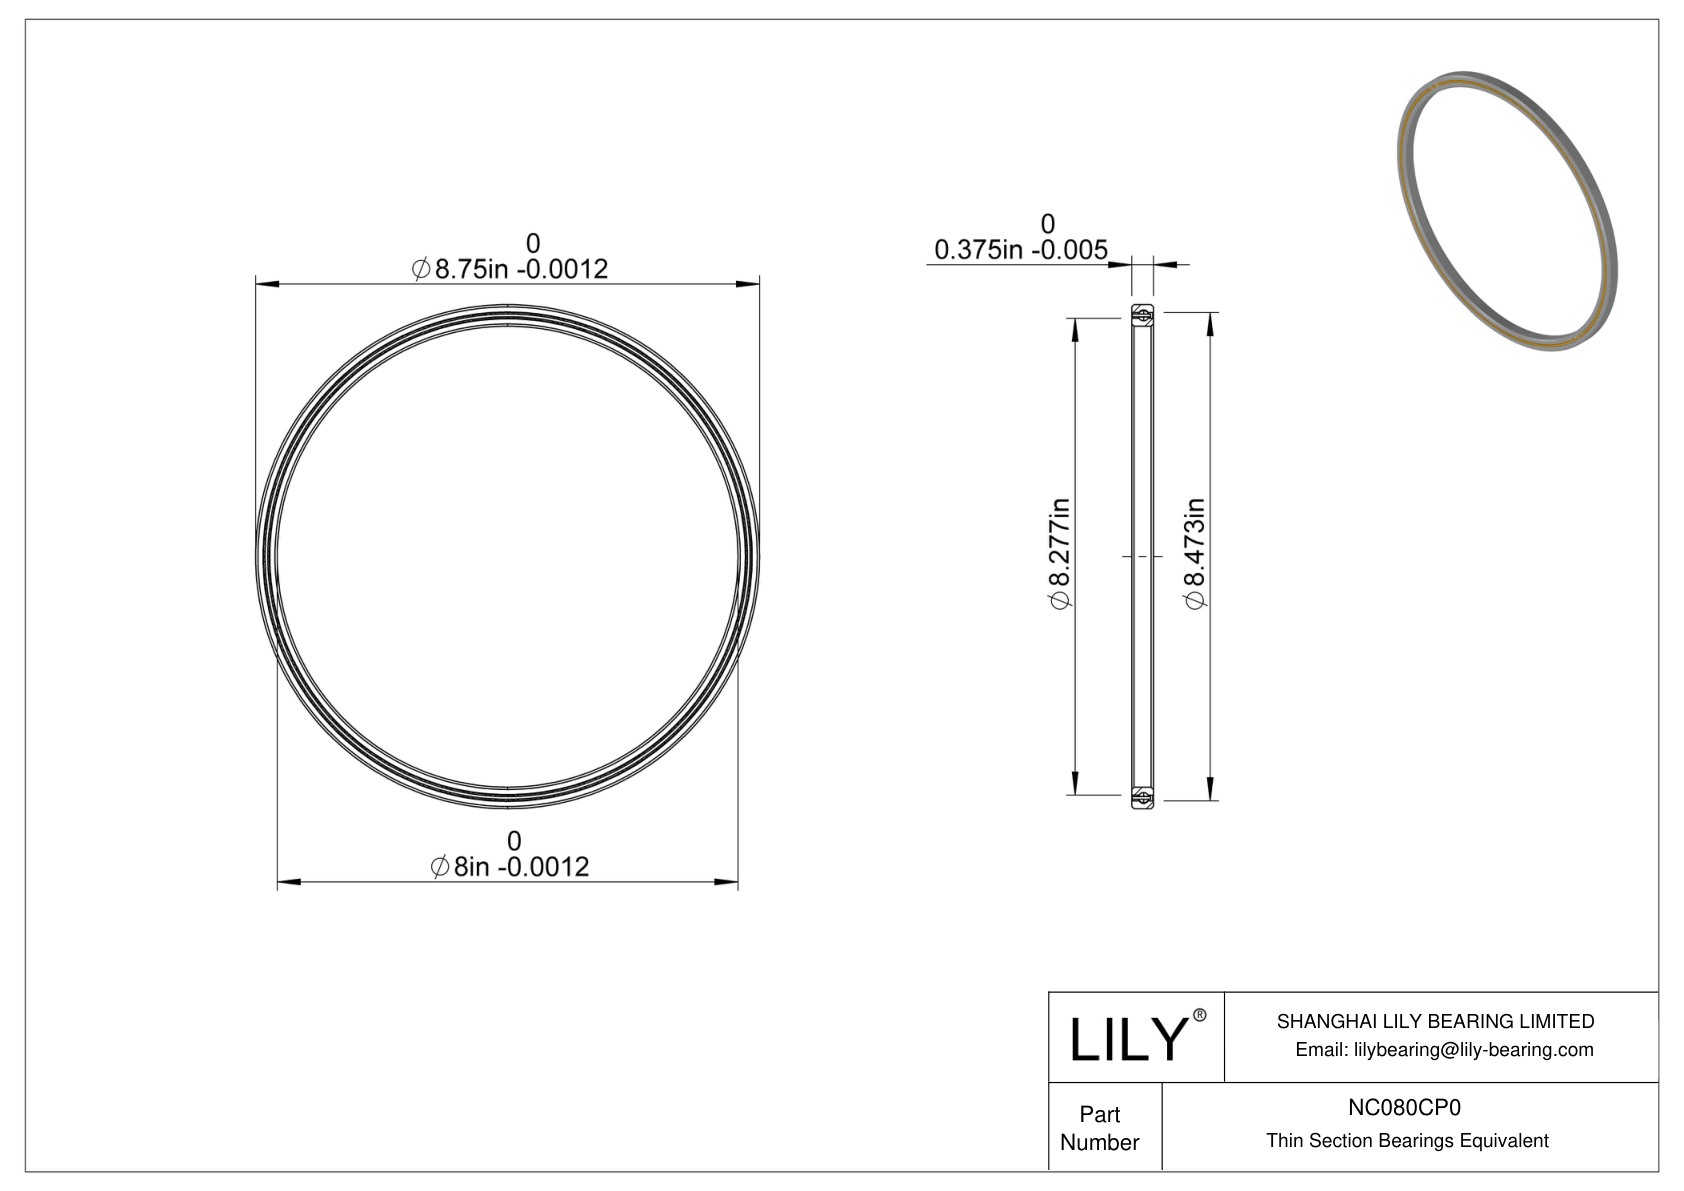 NC080CP0 Constant Section (CS) Bearings cad drawing